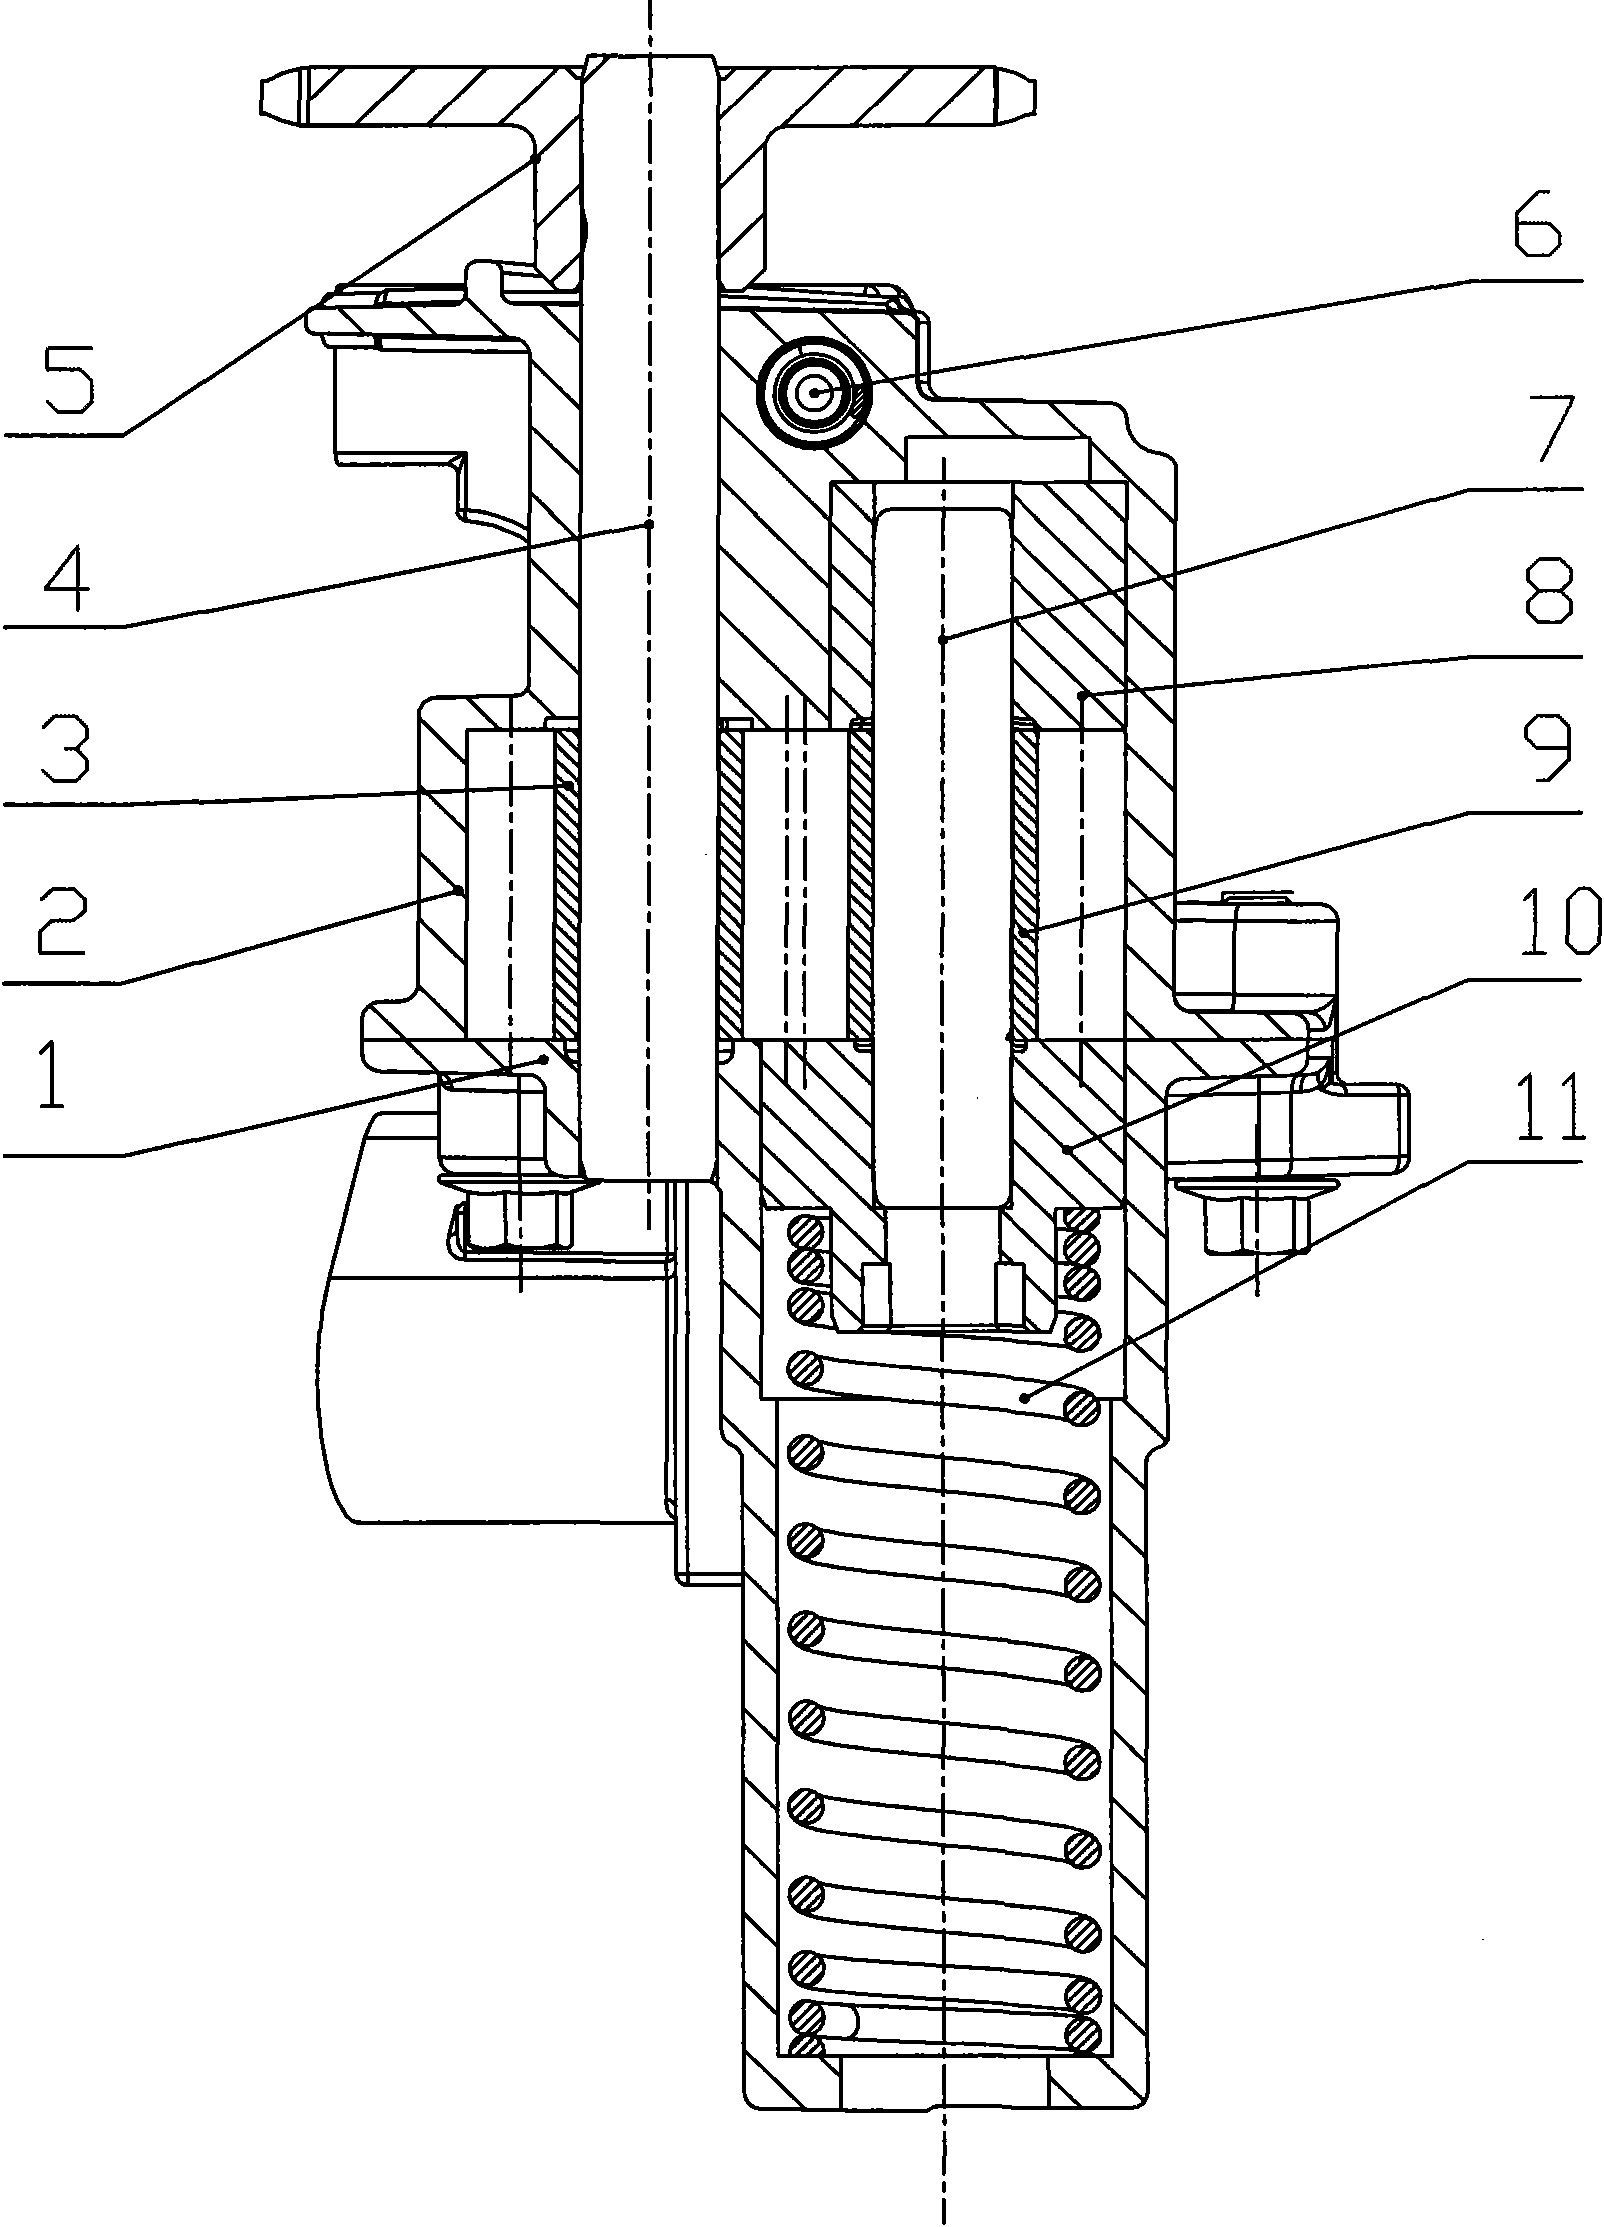 Variable-displacement gear-type oil pump